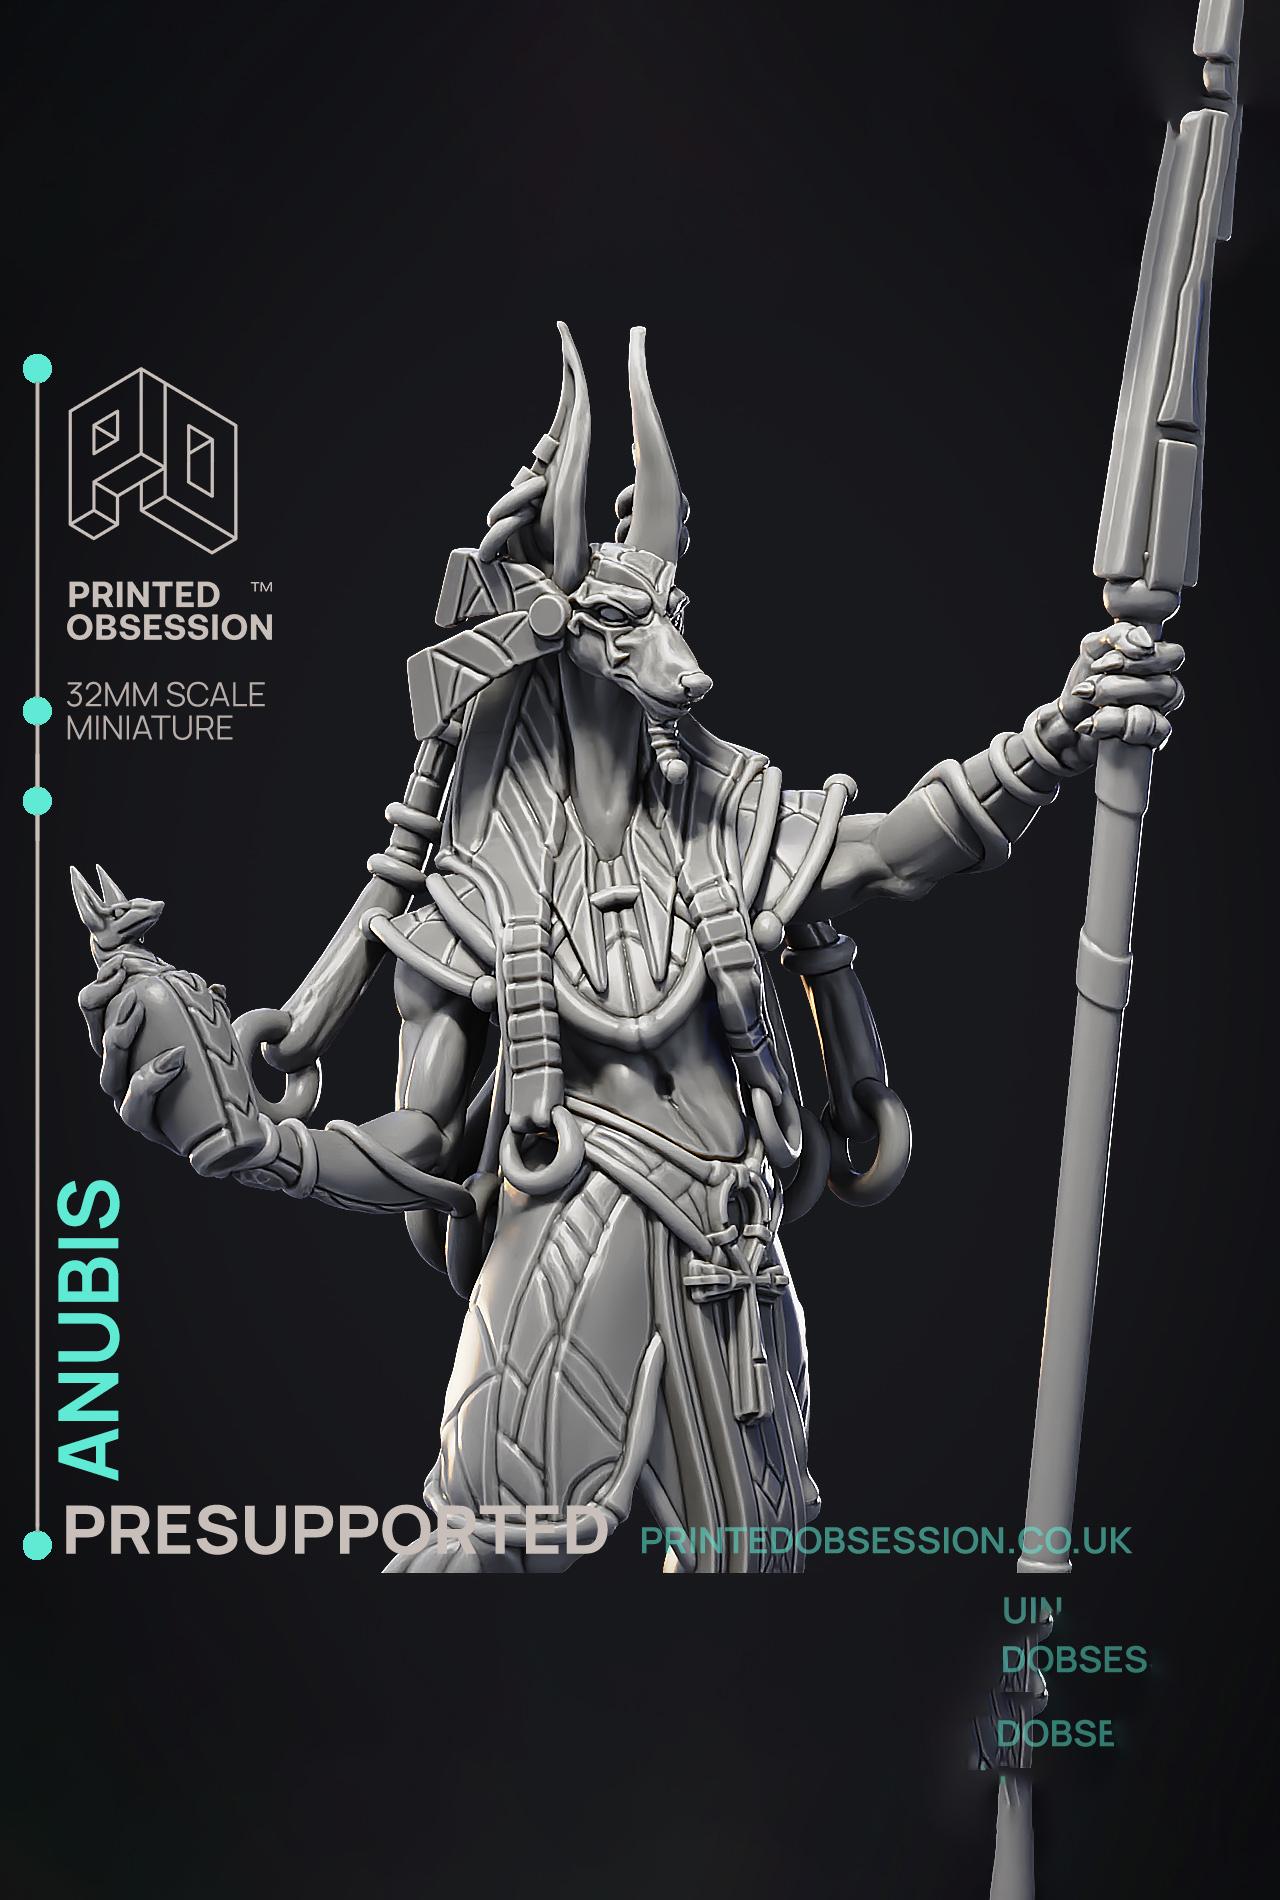 Anubis - God of Death - Court of Anubis -  PRESUPPORTED - Illustrated and Stats - 32mm scale 3d model